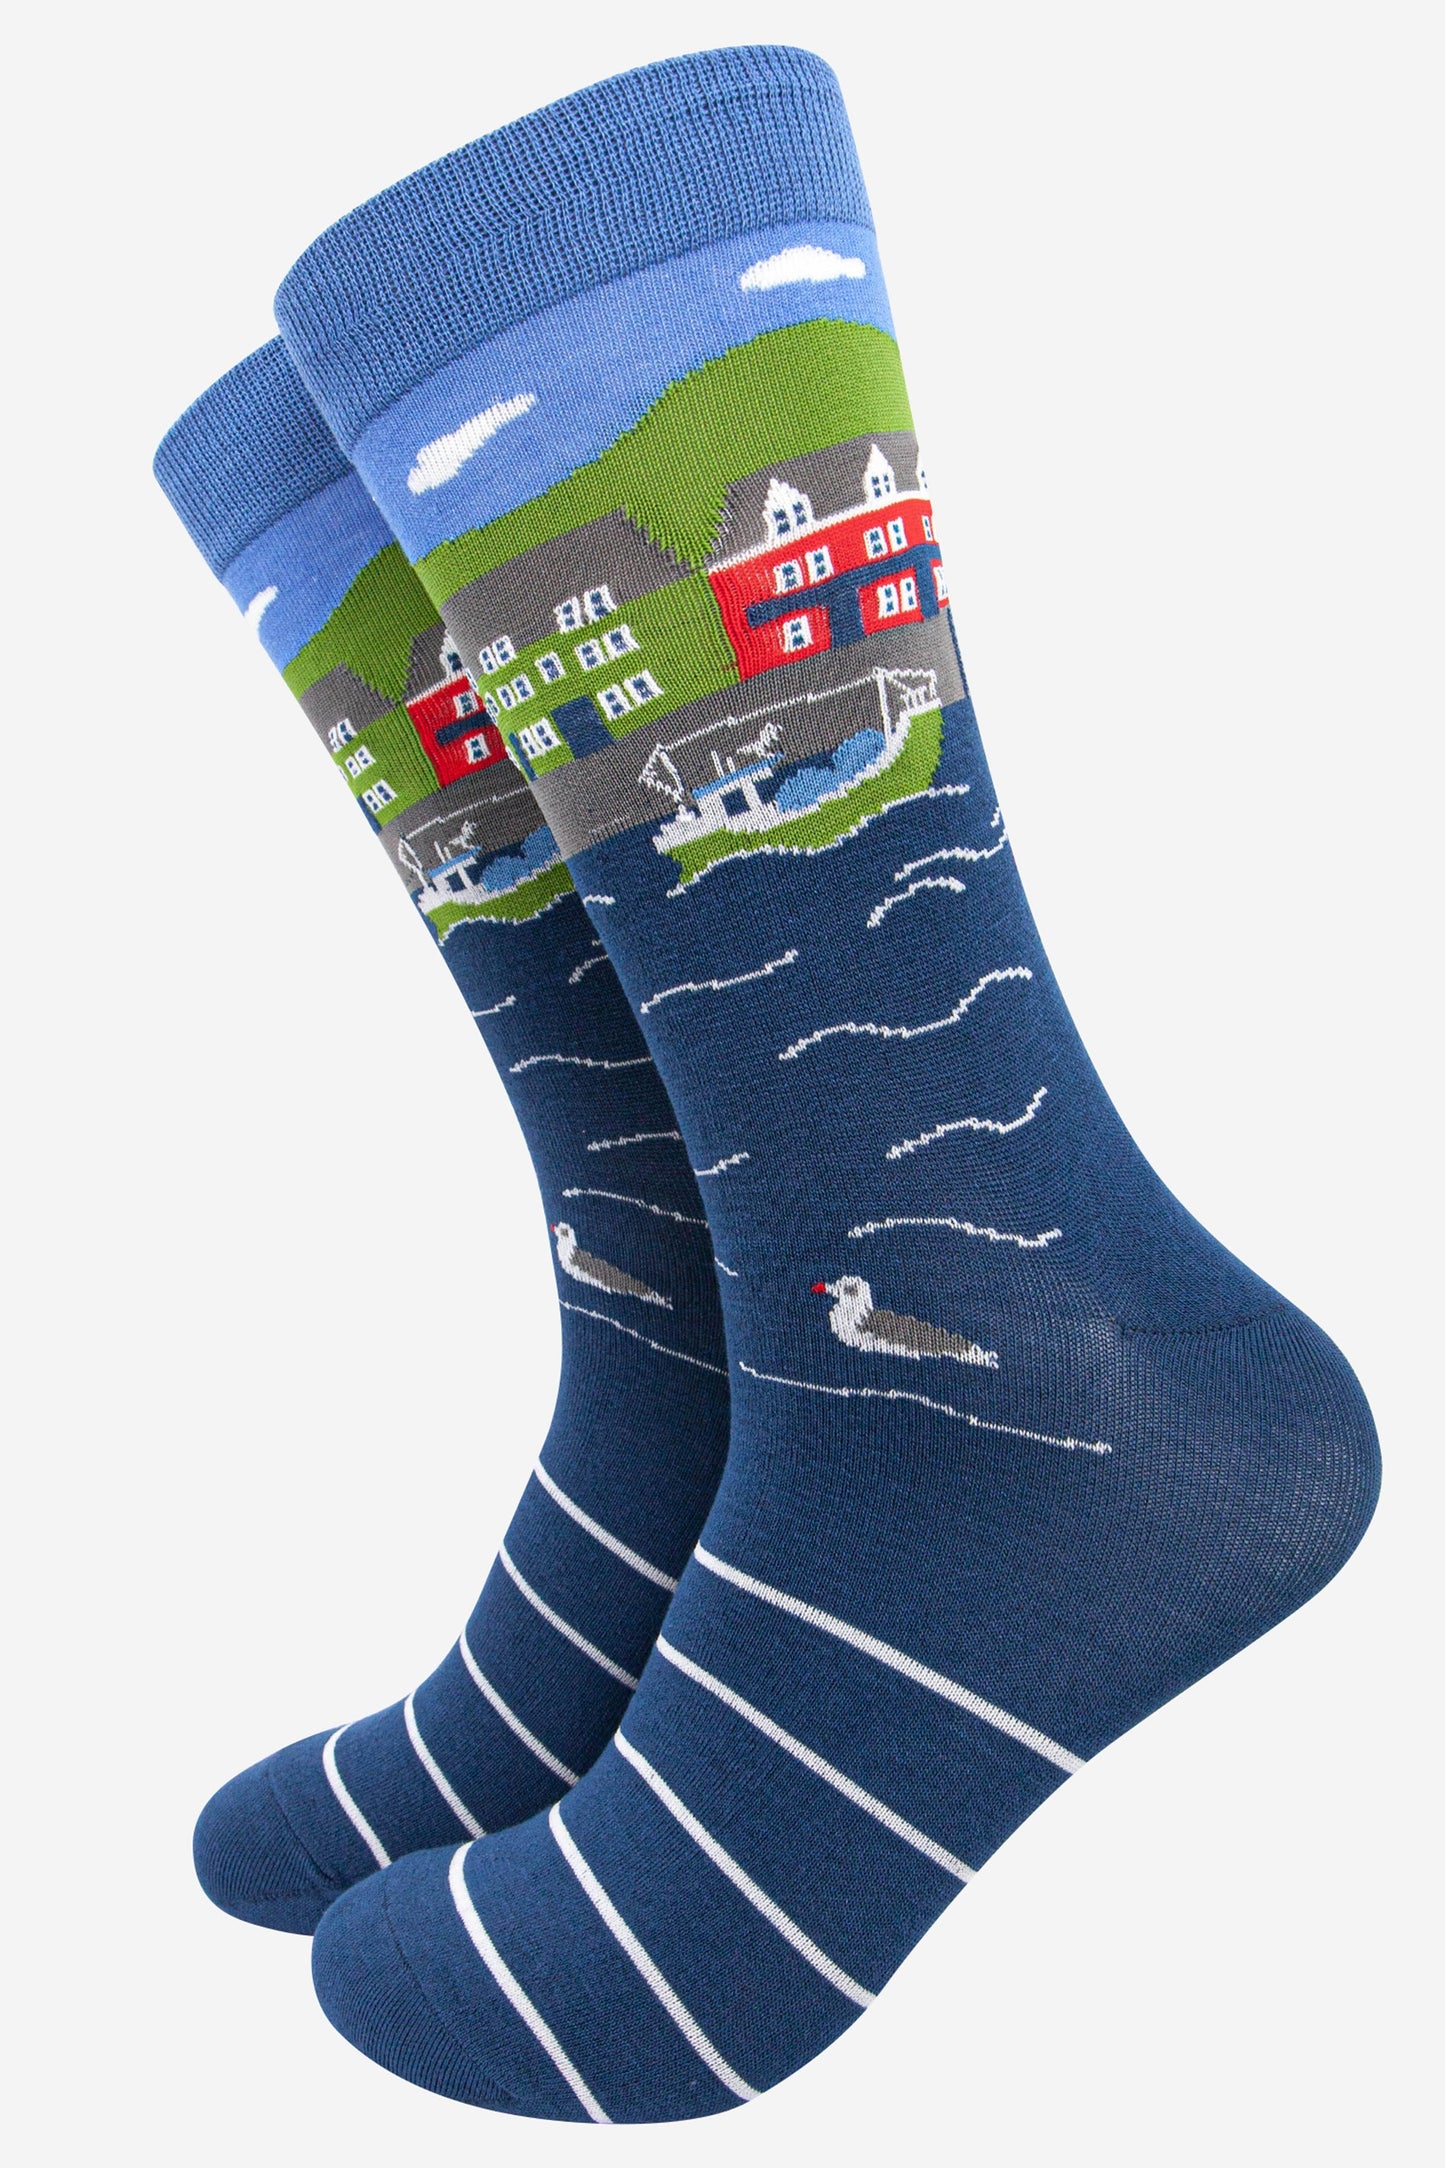 blue bamboo socks designed to look like a fishing village with a fishing boat, seagull and colourful houses beside a harbour